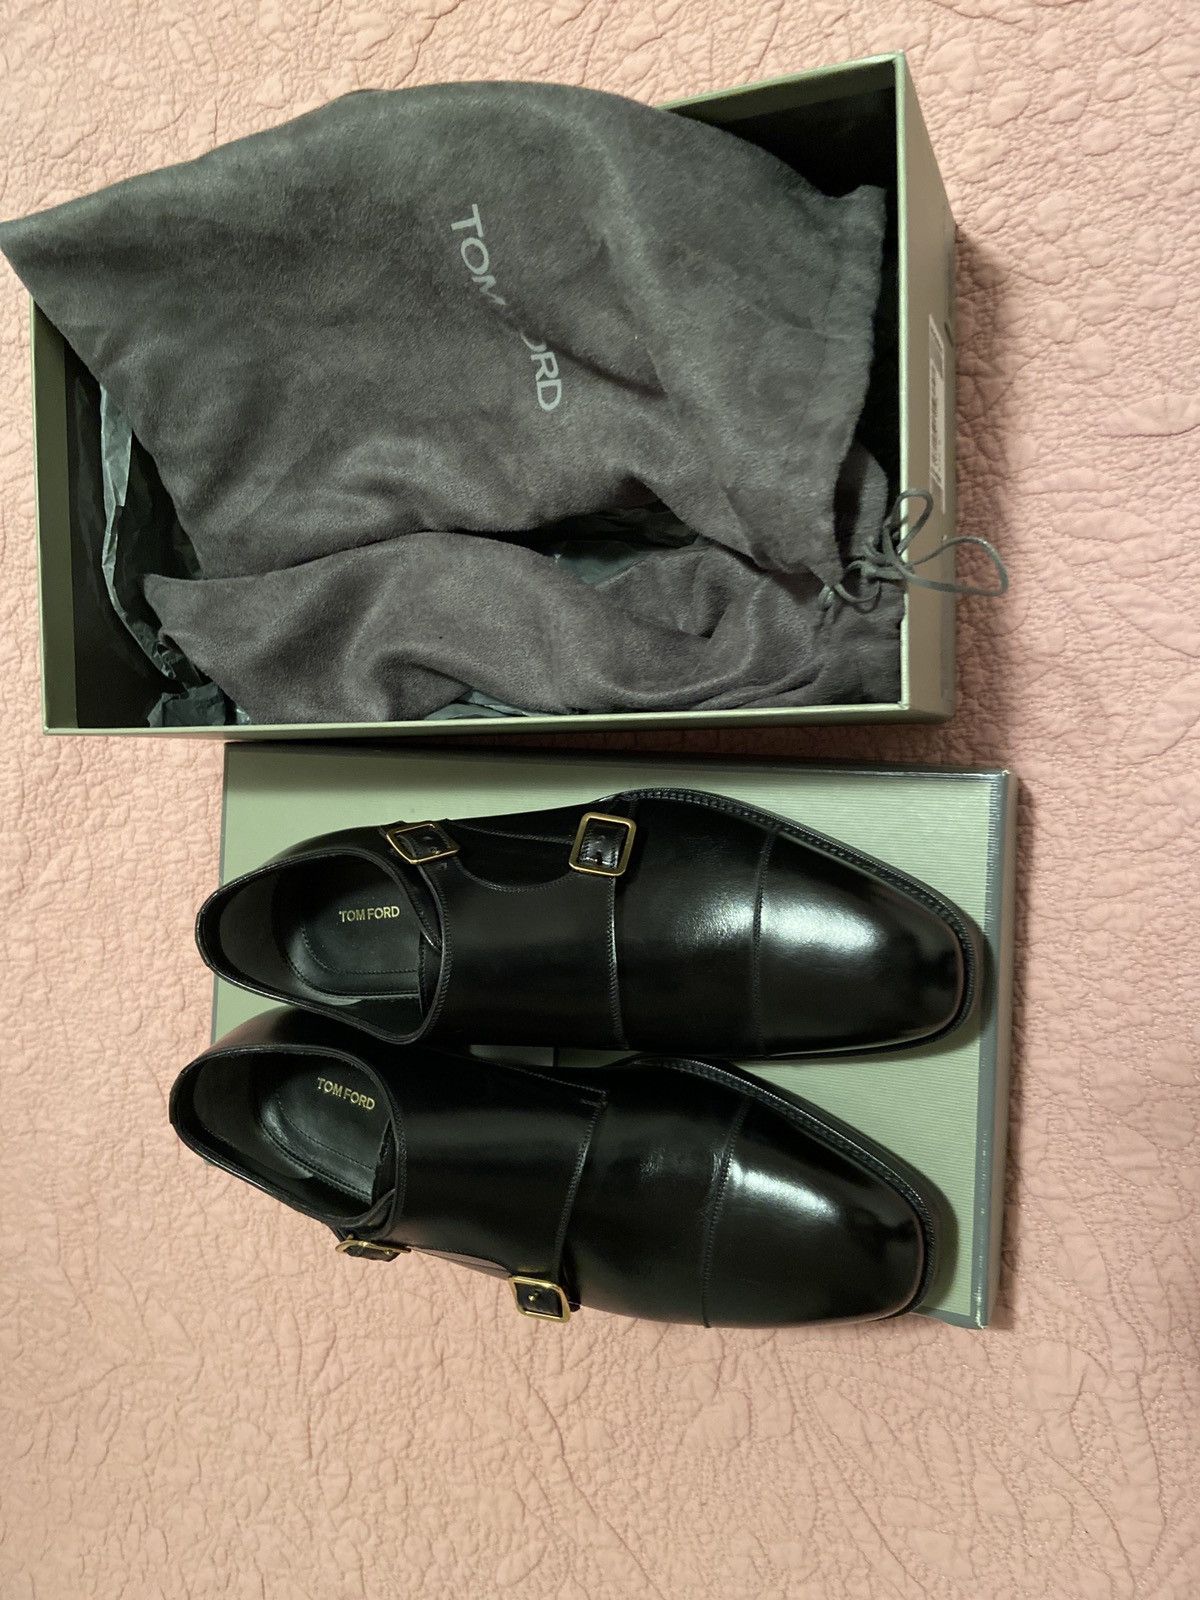 Tom Ford Double Monk strap | Grailed